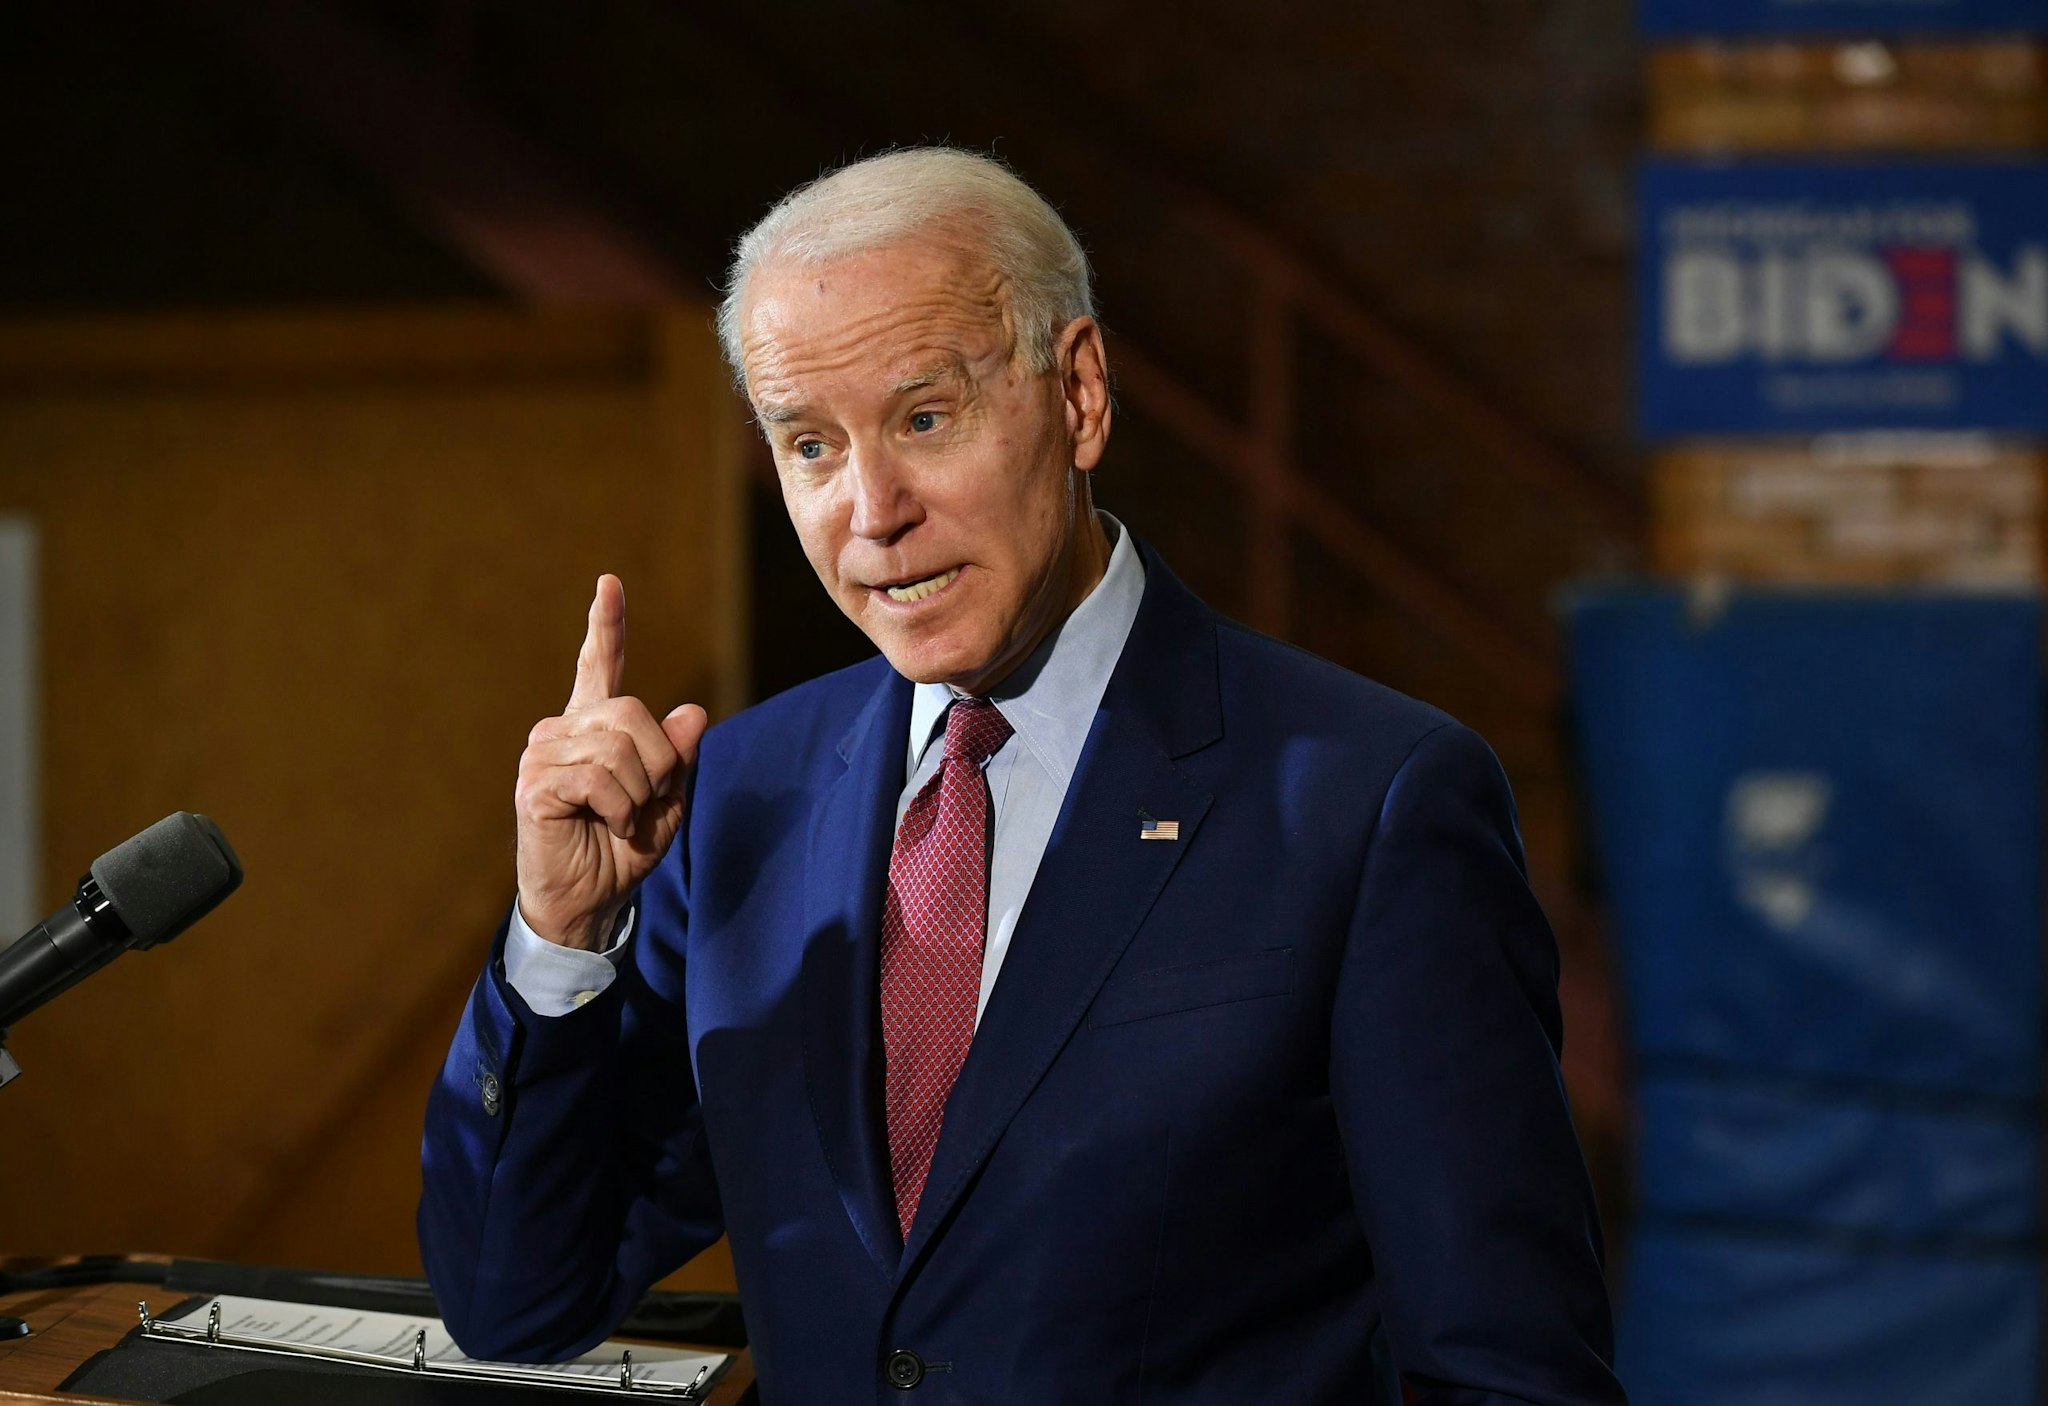 Democratic presidential candidate Joe Biden speaks to supporters during a campaign stop at Berston Field House in Flint, Michigan on March 9, 2020. (Photo by MANDEL NGAN / AFP) (Photo by MANDEL NGAN/AFP via Getty Images)